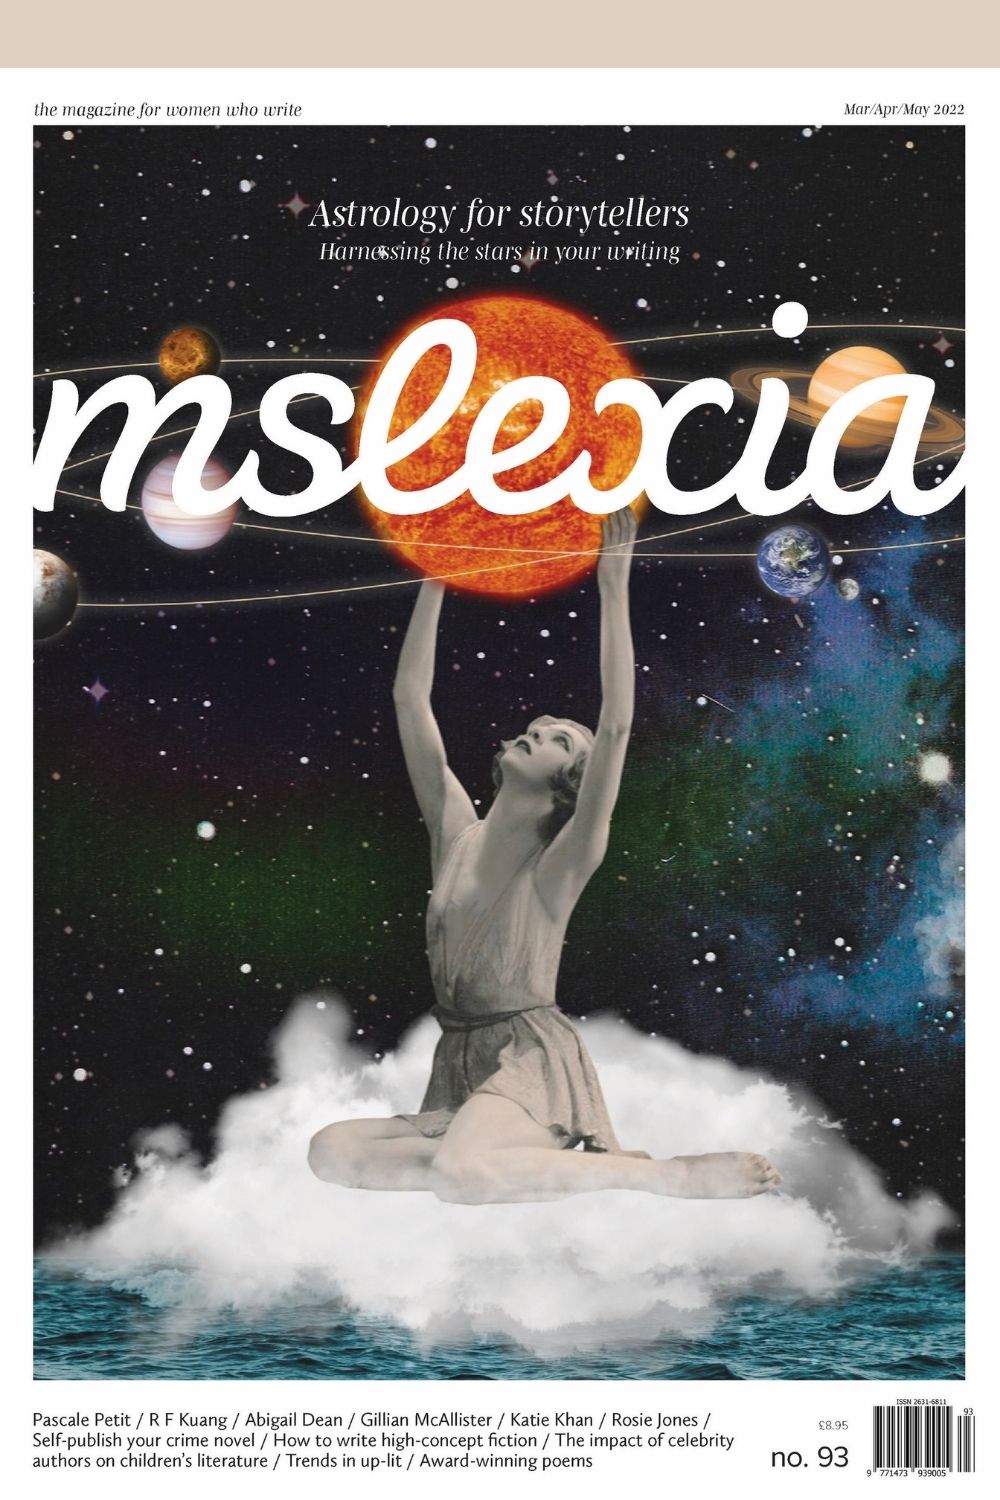 Mslexia Issue 93 - for women who write